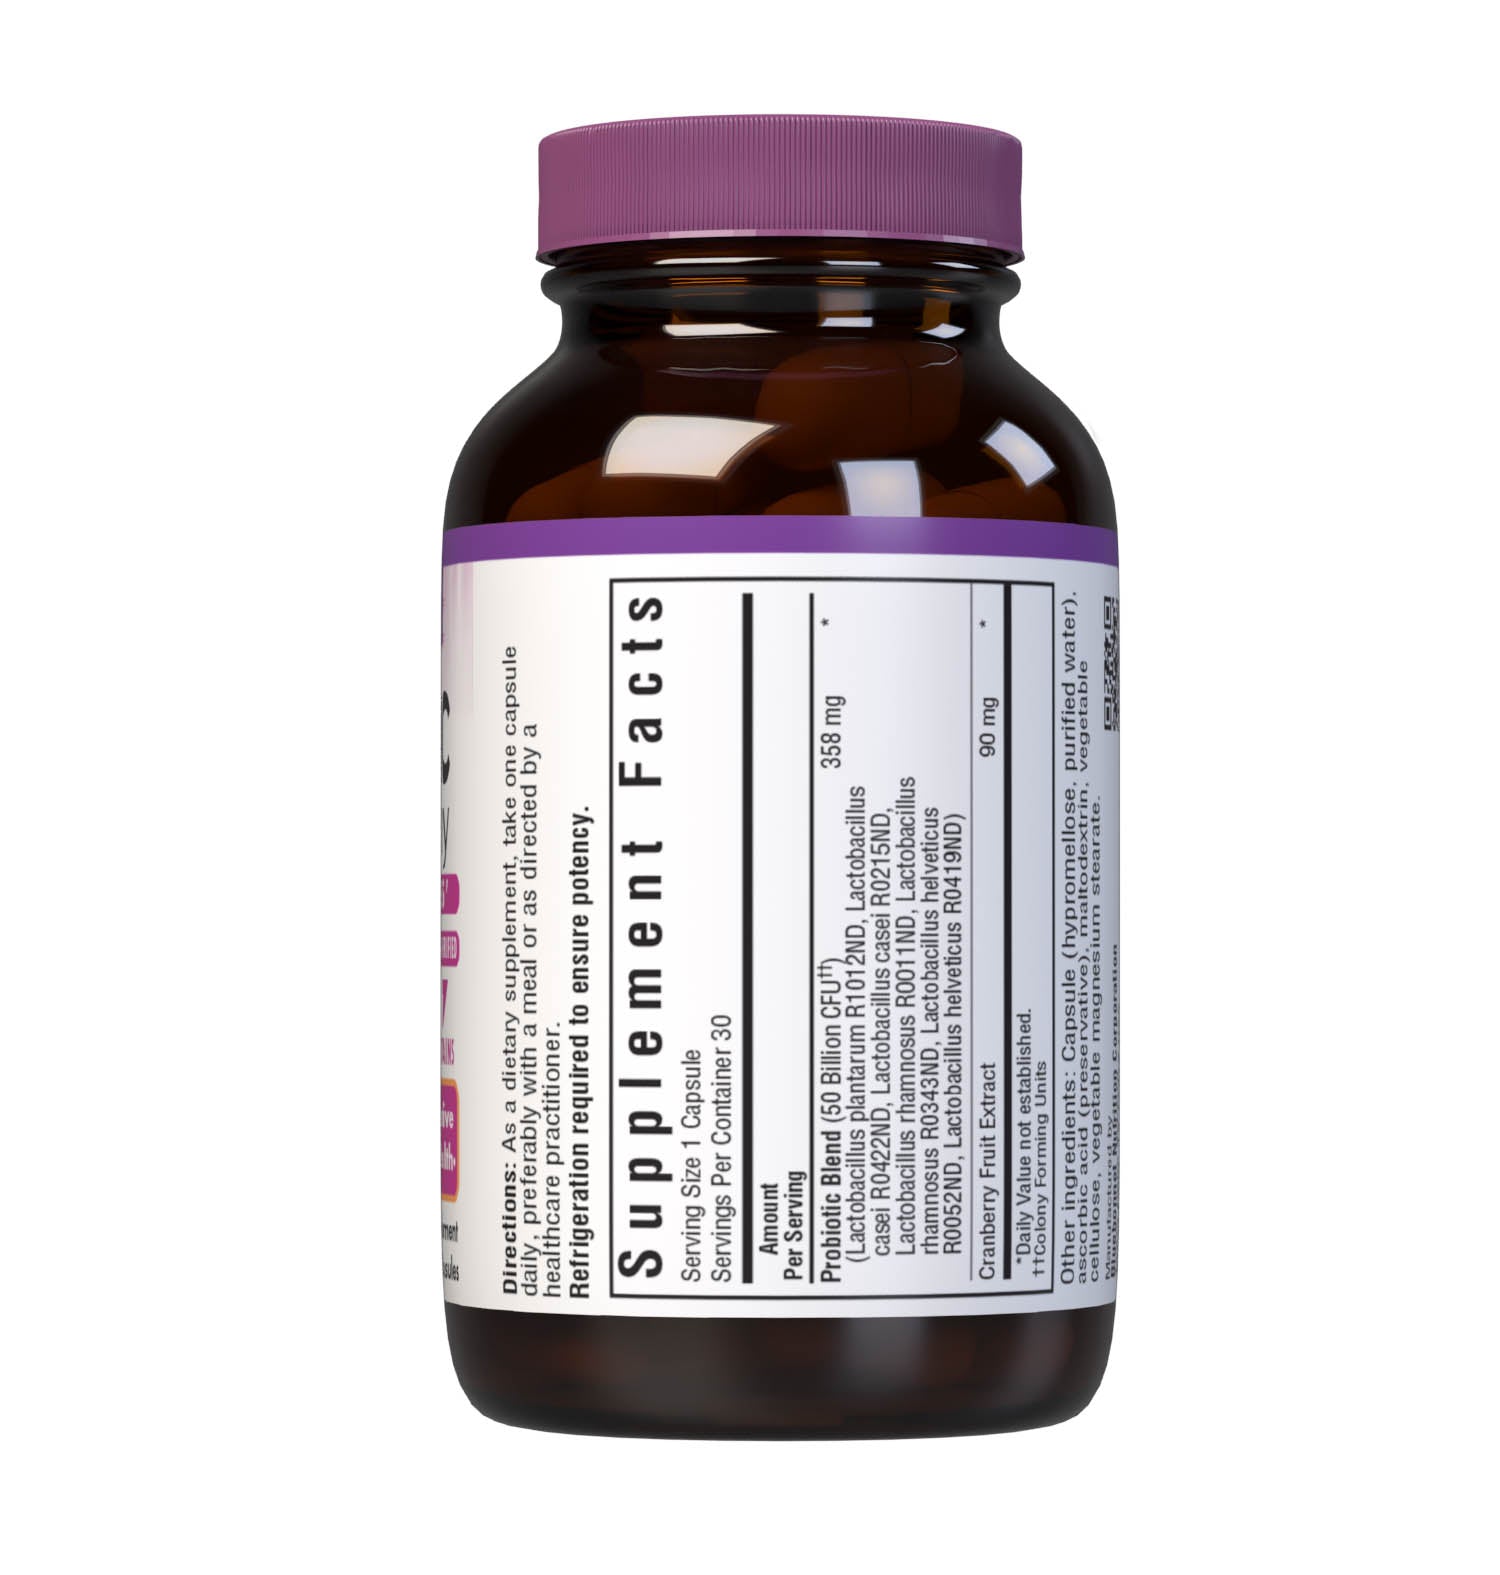 Bluebonnet’s Probiotic & Cranberry 30 Vegetable Capsules are formulated with 50 billion viable cultures from 7 DNA-verified, scientifically supported strains. This unique, science-based probiotic formula is infused with cranberry fruit extract to further nurture urinary tract health. Supplement facts panel. #size_30 count